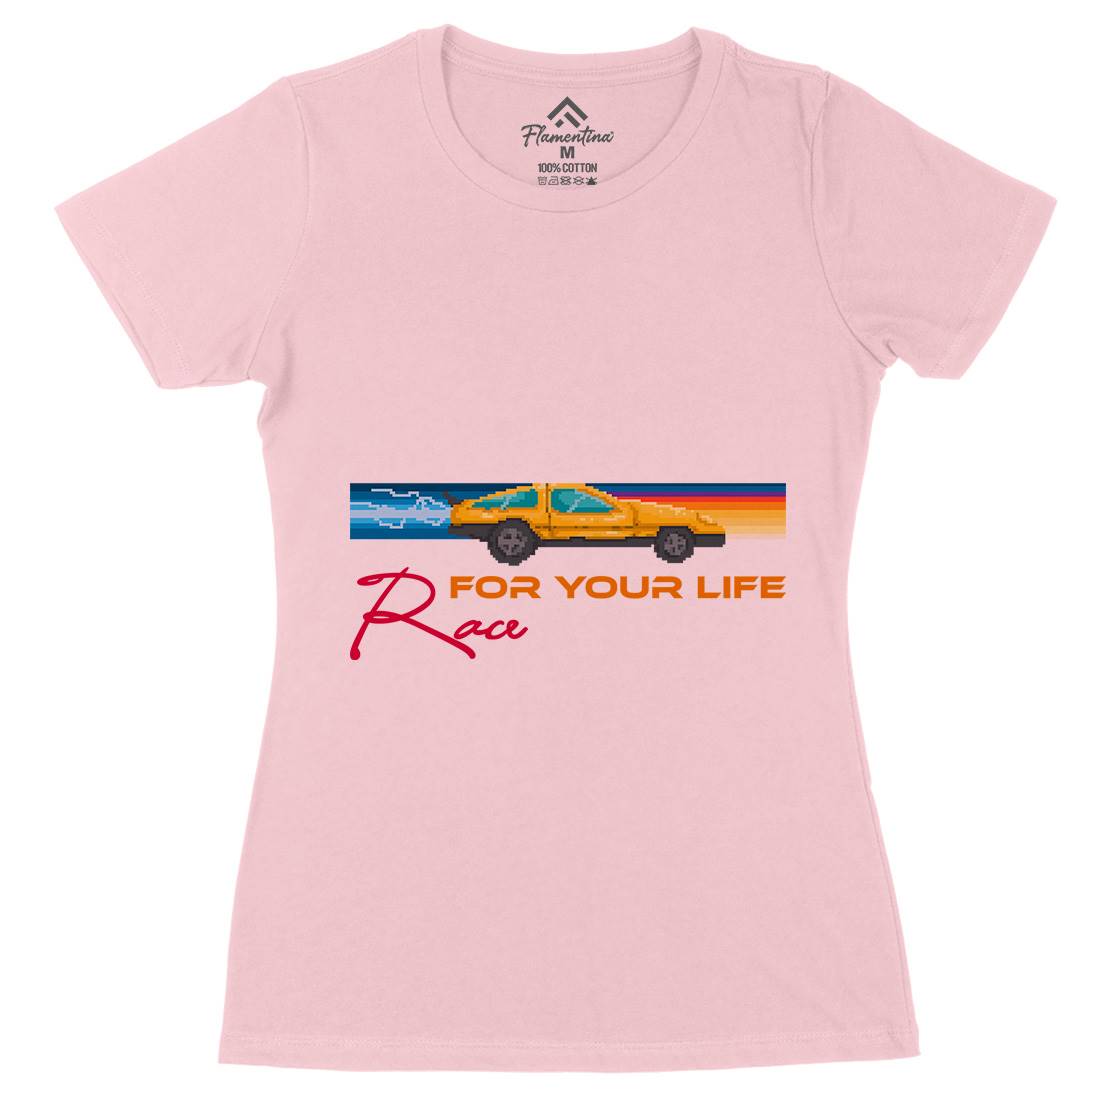 Race For Your Life Womens Organic Crew Neck T-Shirt Cars B951